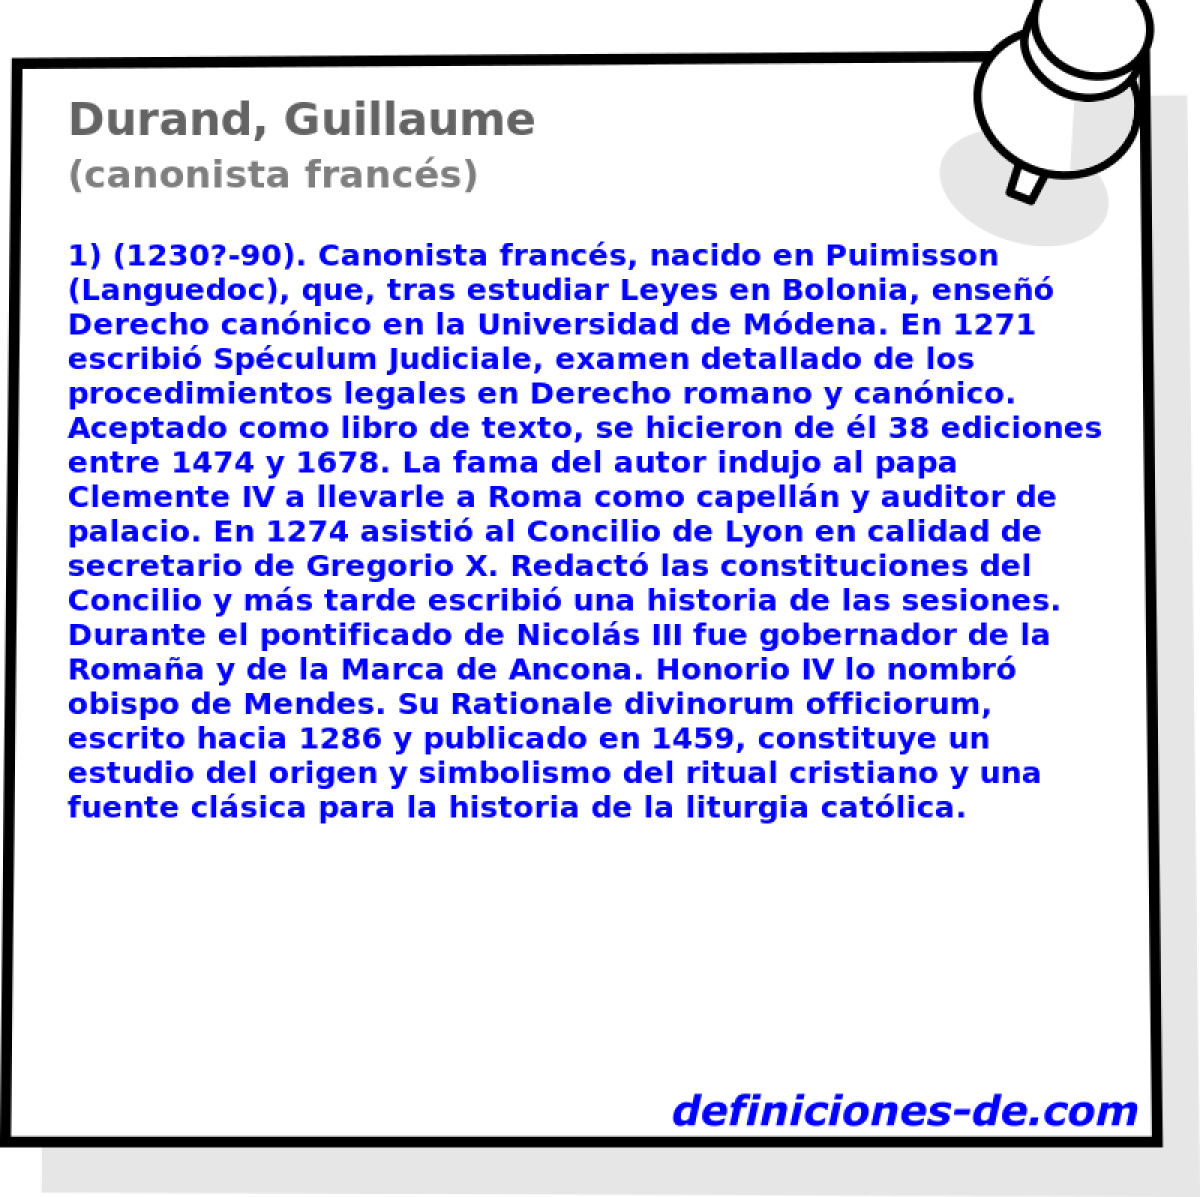 Durand, Guillaume (canonista francs)